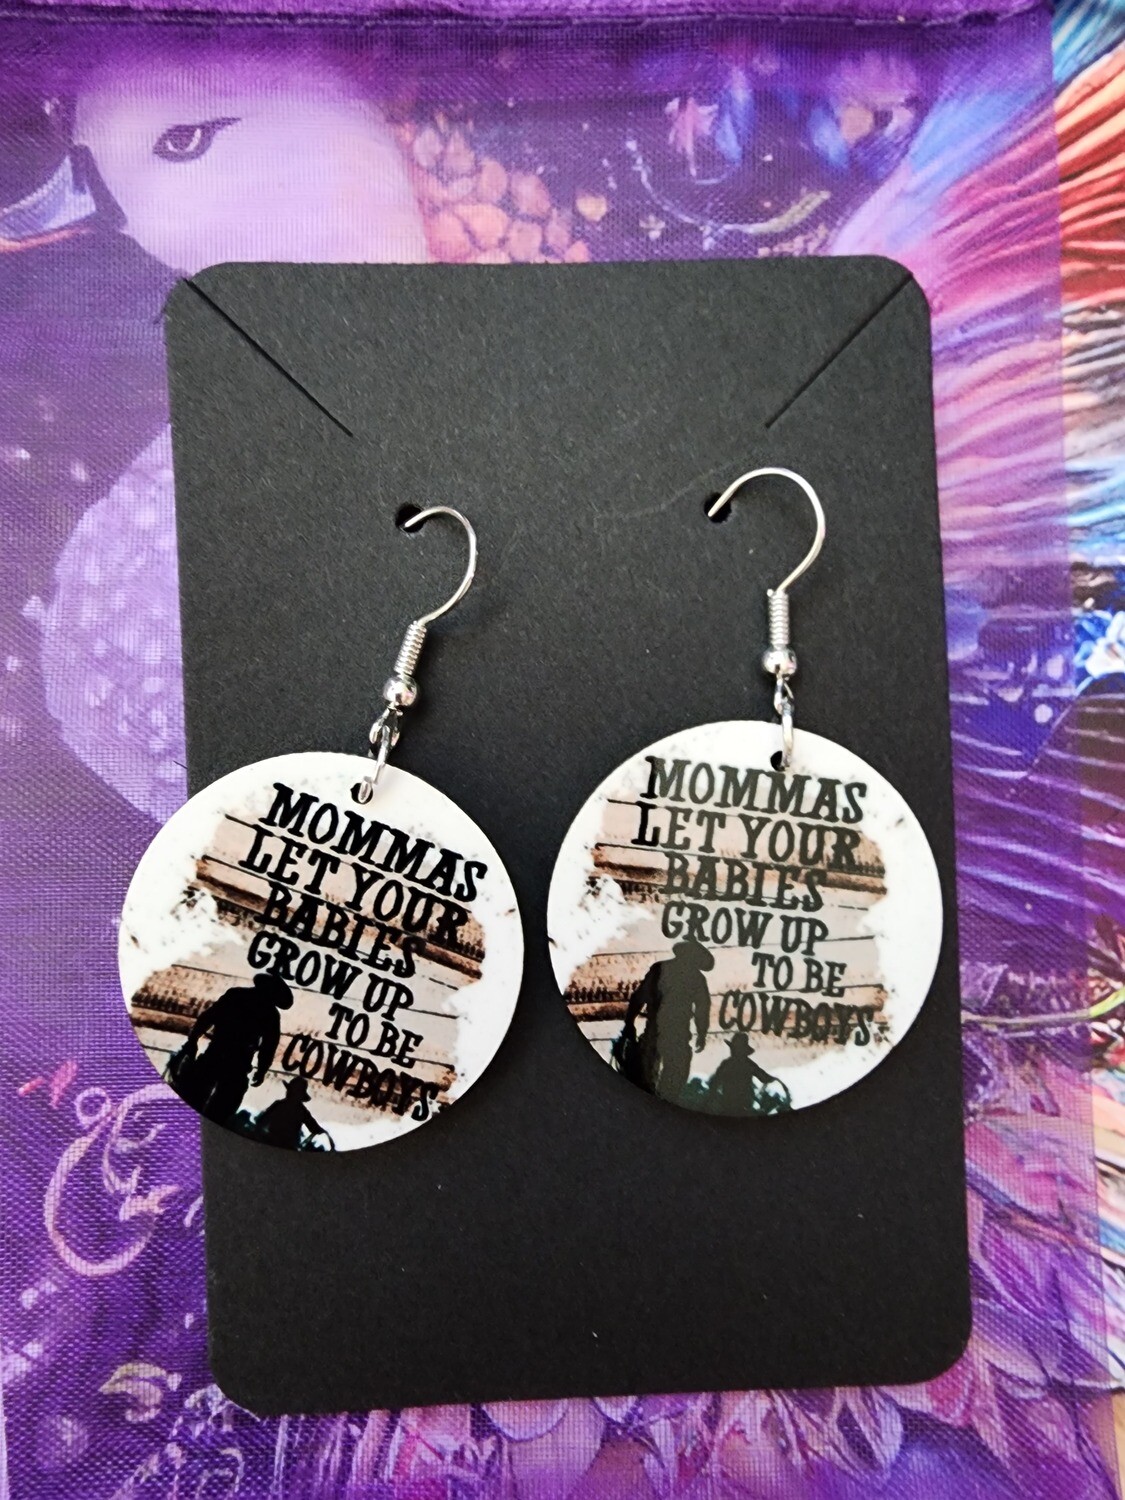 "Mamma's Let Your Babies Grow Up to be Cowboys" earrings